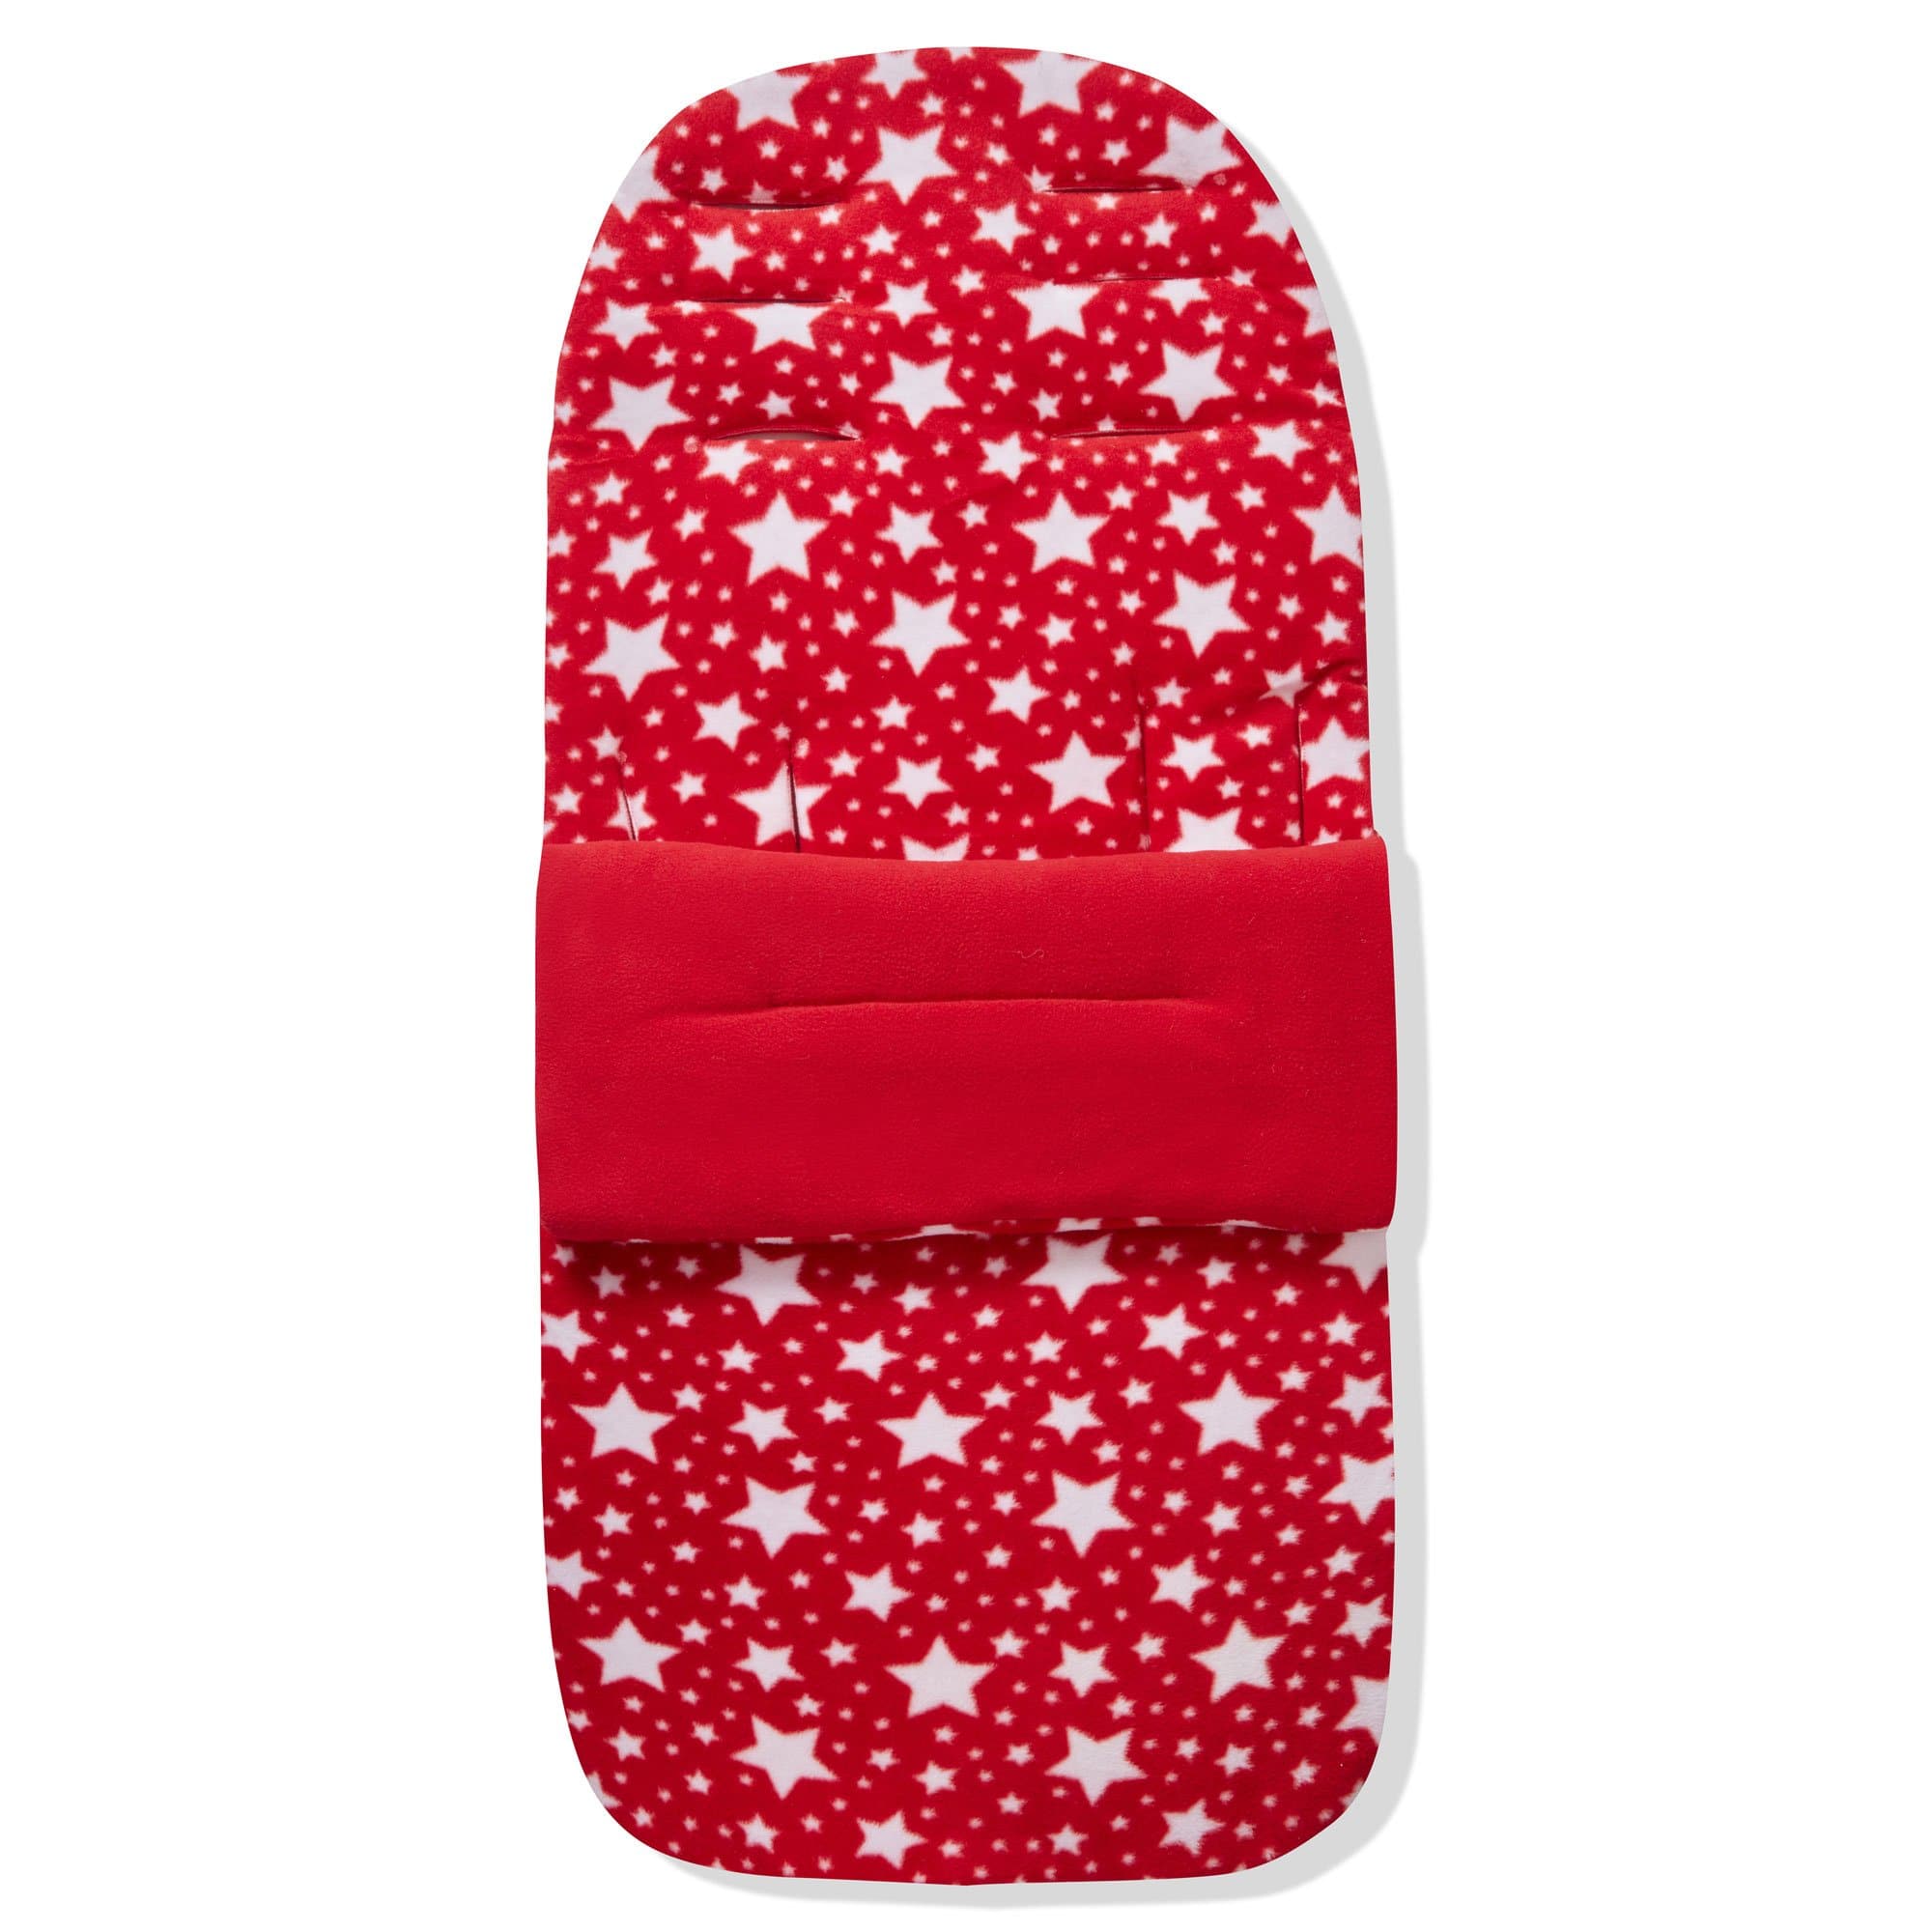 Universal Fleece Pushchair Footmuff / Cosy Toes - Fits All Pushchairs / Prams And Buggies Red Star Fits All Models 